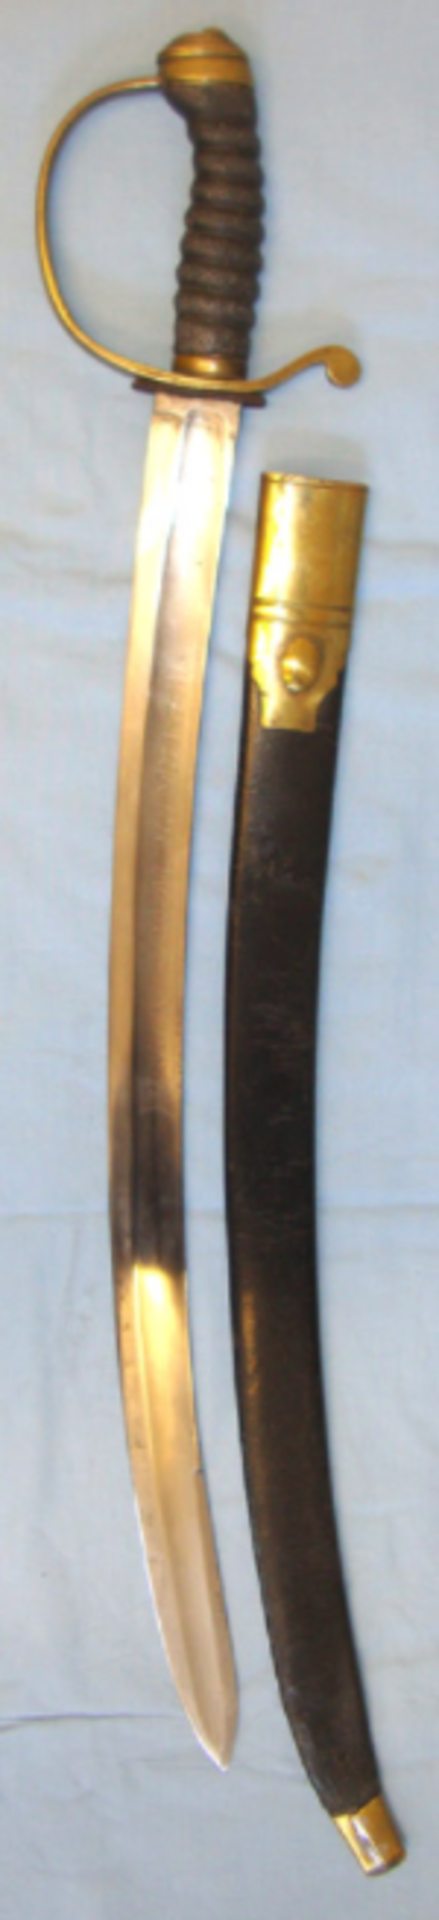 Victorian London Constabulary W. Parker Warranted Etched Police Hanger / Cutlass (Later Parker Field